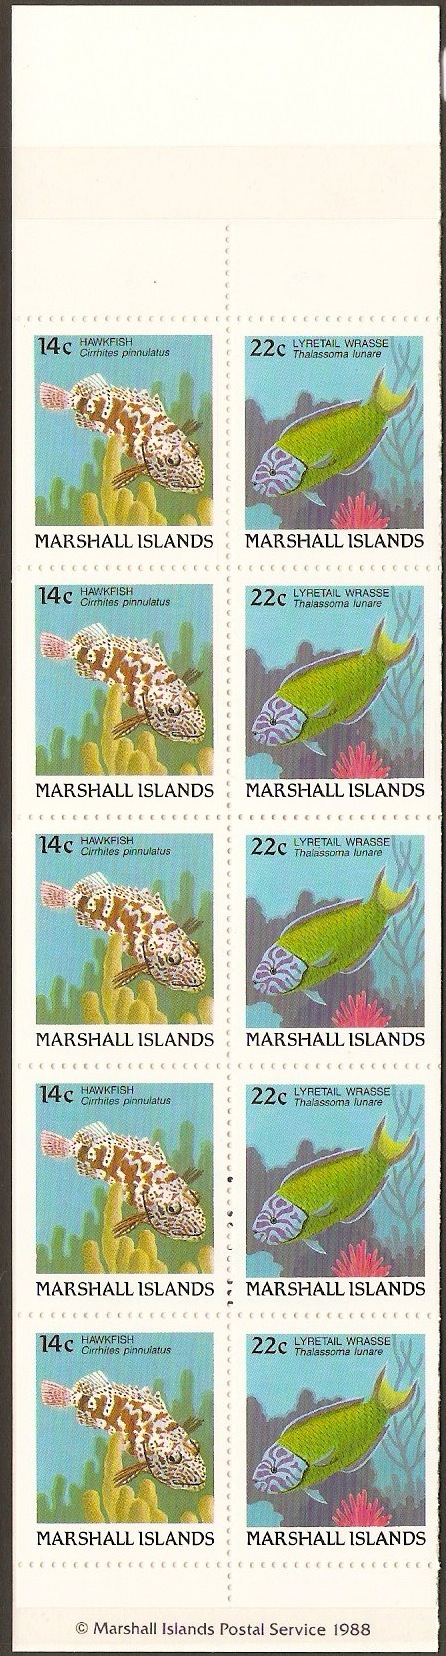 Marshall Islands 1988 Fish Series Stamp Booklet. SG149-SG152.